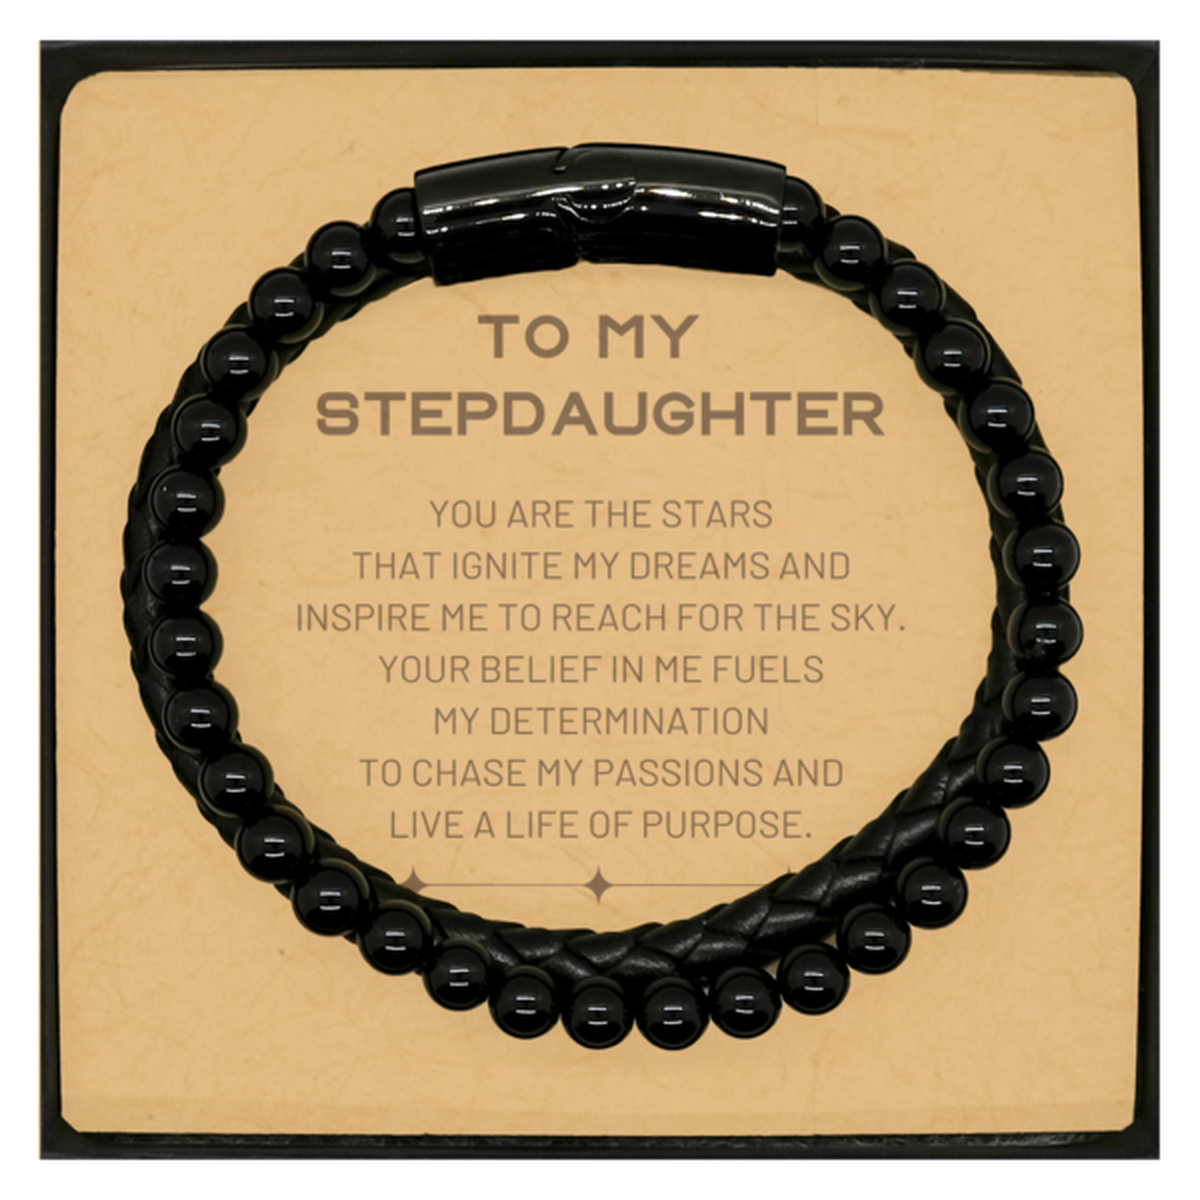 To My Stepdaughter Stone Leather Bracelets, You are the stars that ignite my dreams and inspire me to reach for the sky, Birthday Christmas Unique Gifts For Stepdaughter, Thank You Gifts For Stepdaughter